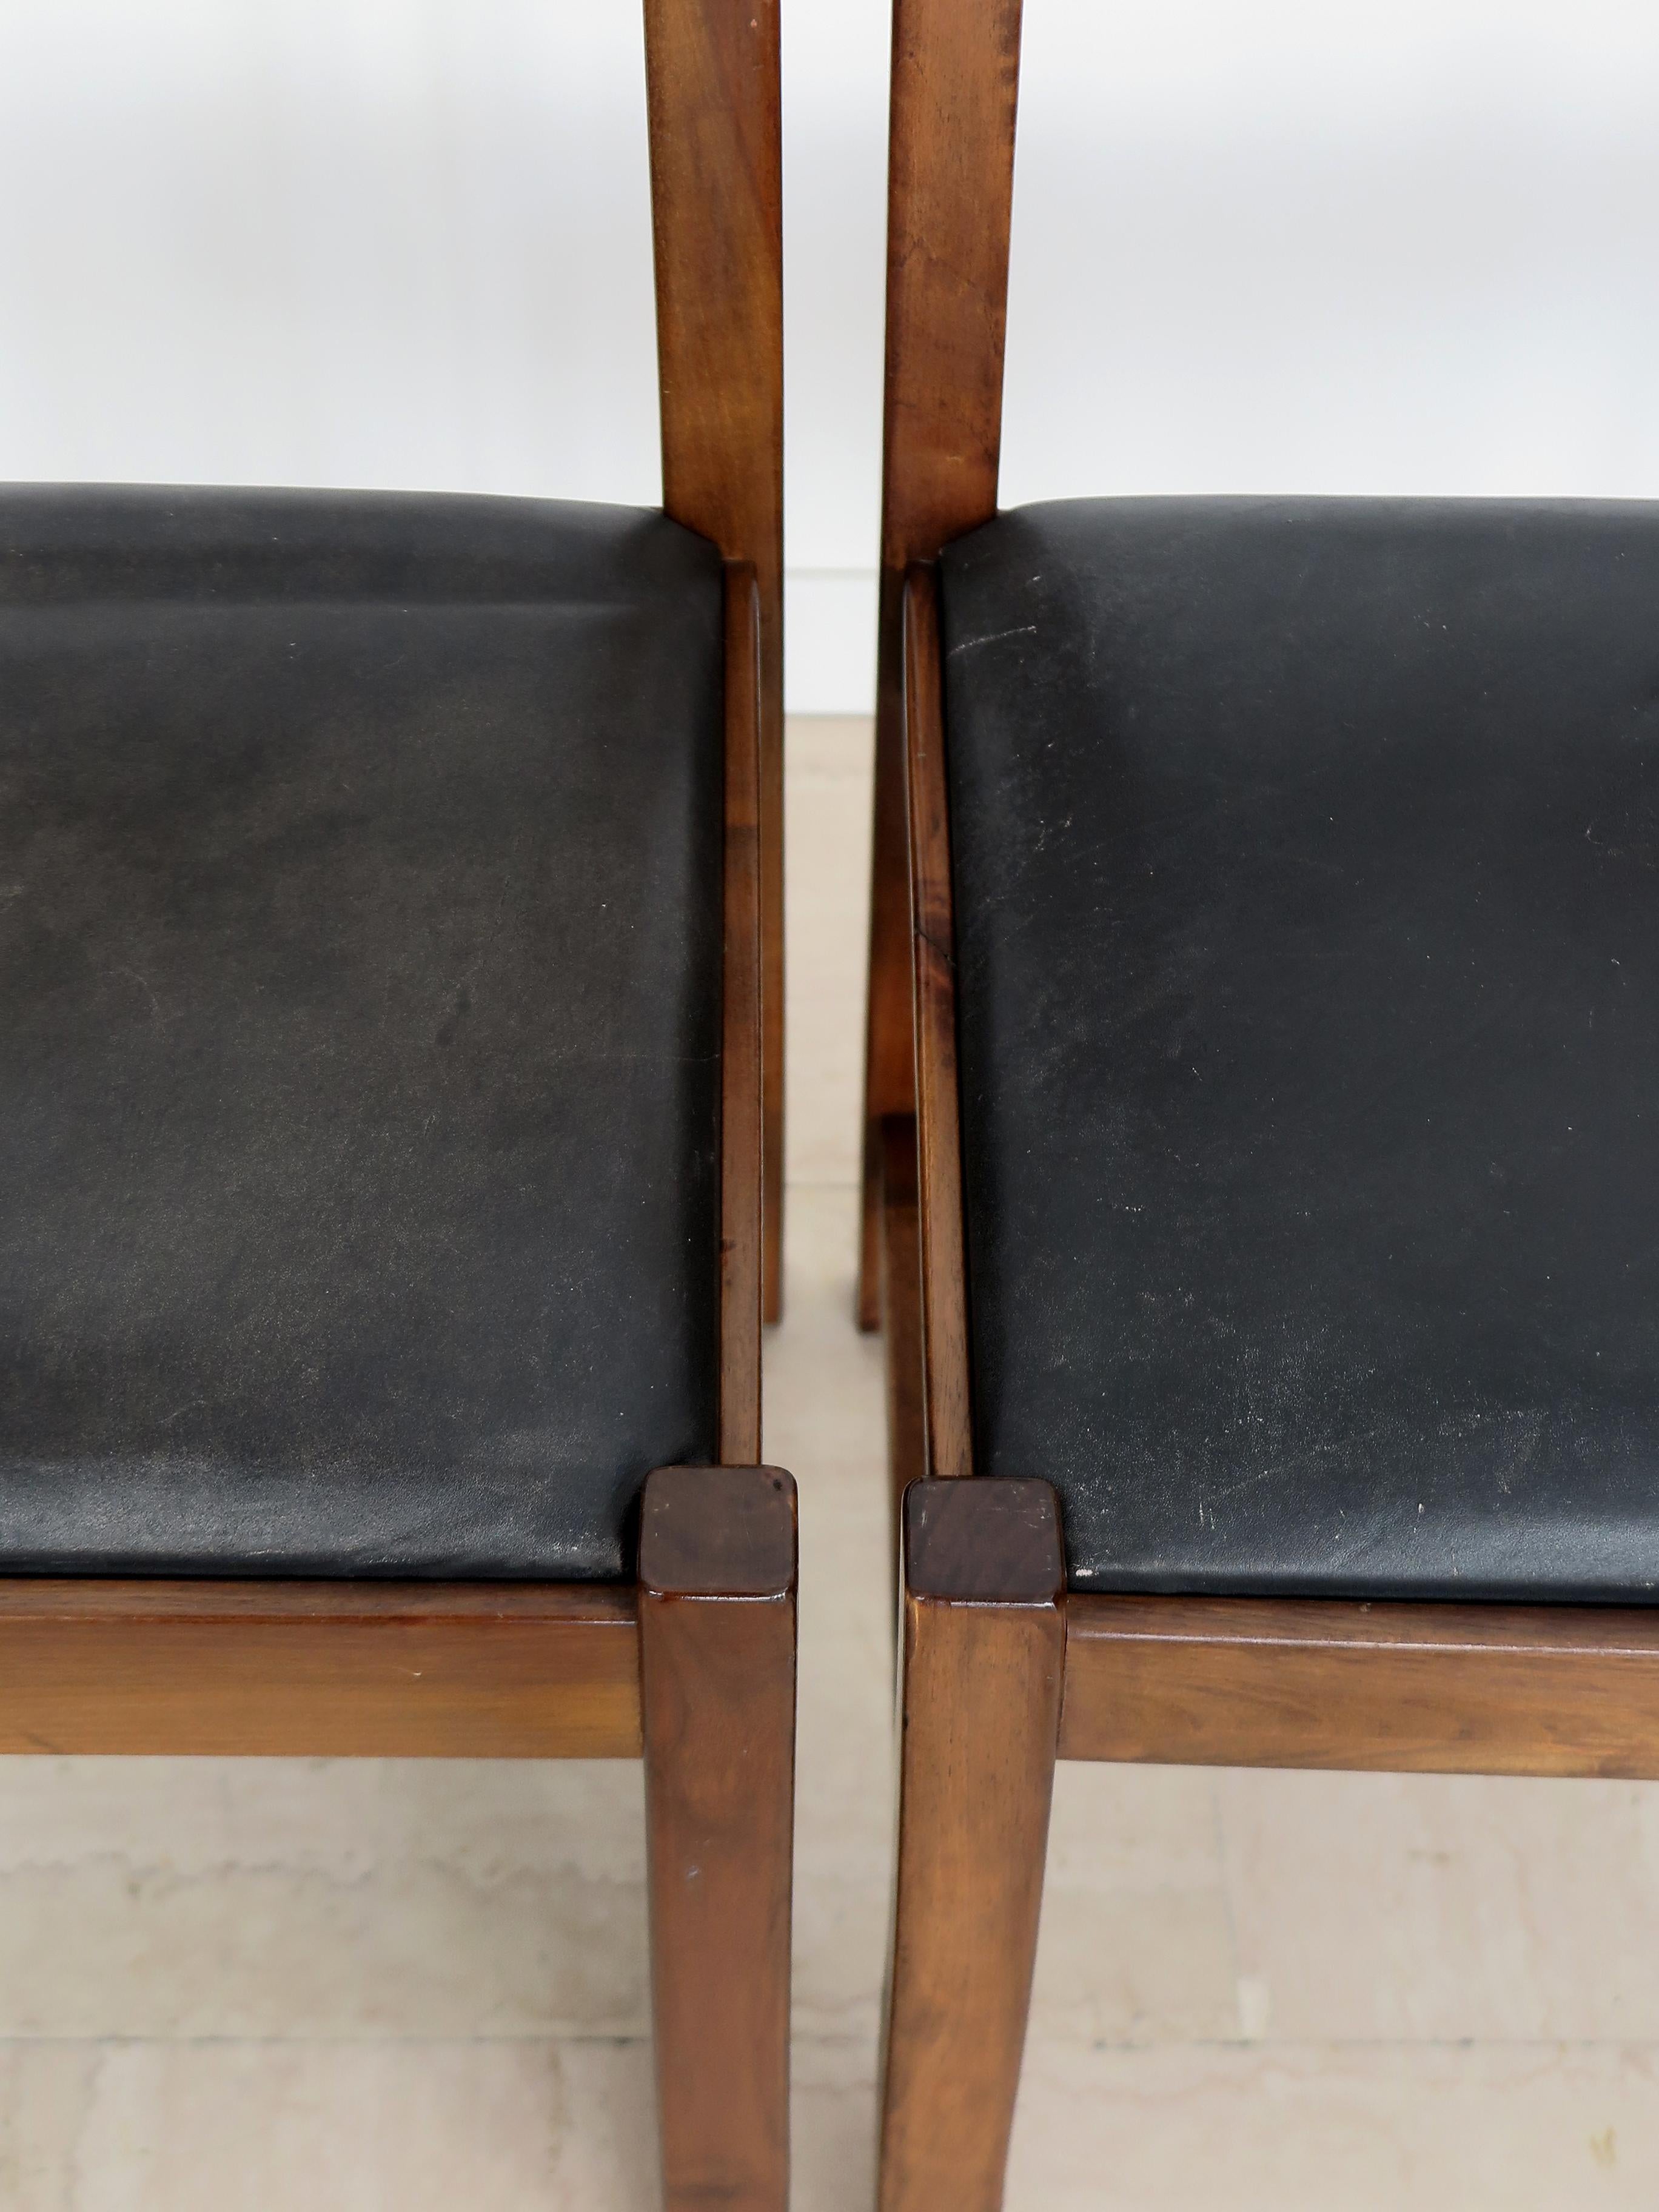 G. Michelucci for Poltronova Italian Midcentury Wood Leather Dining Chairs 1960s For Sale 9